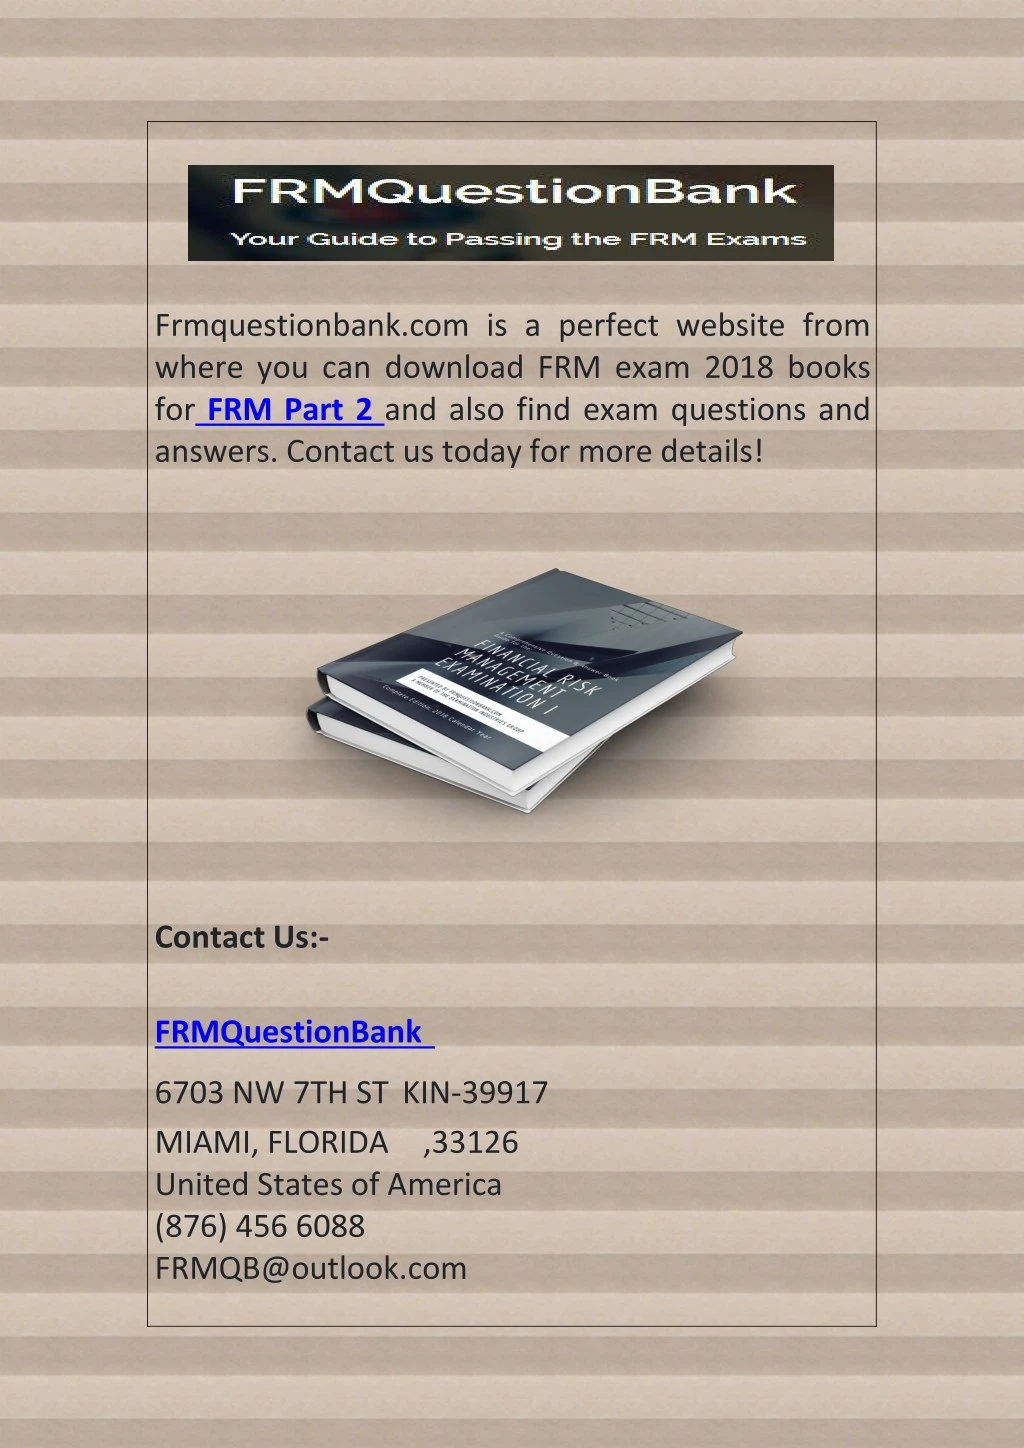 frmquestionbank com is a perfect website from